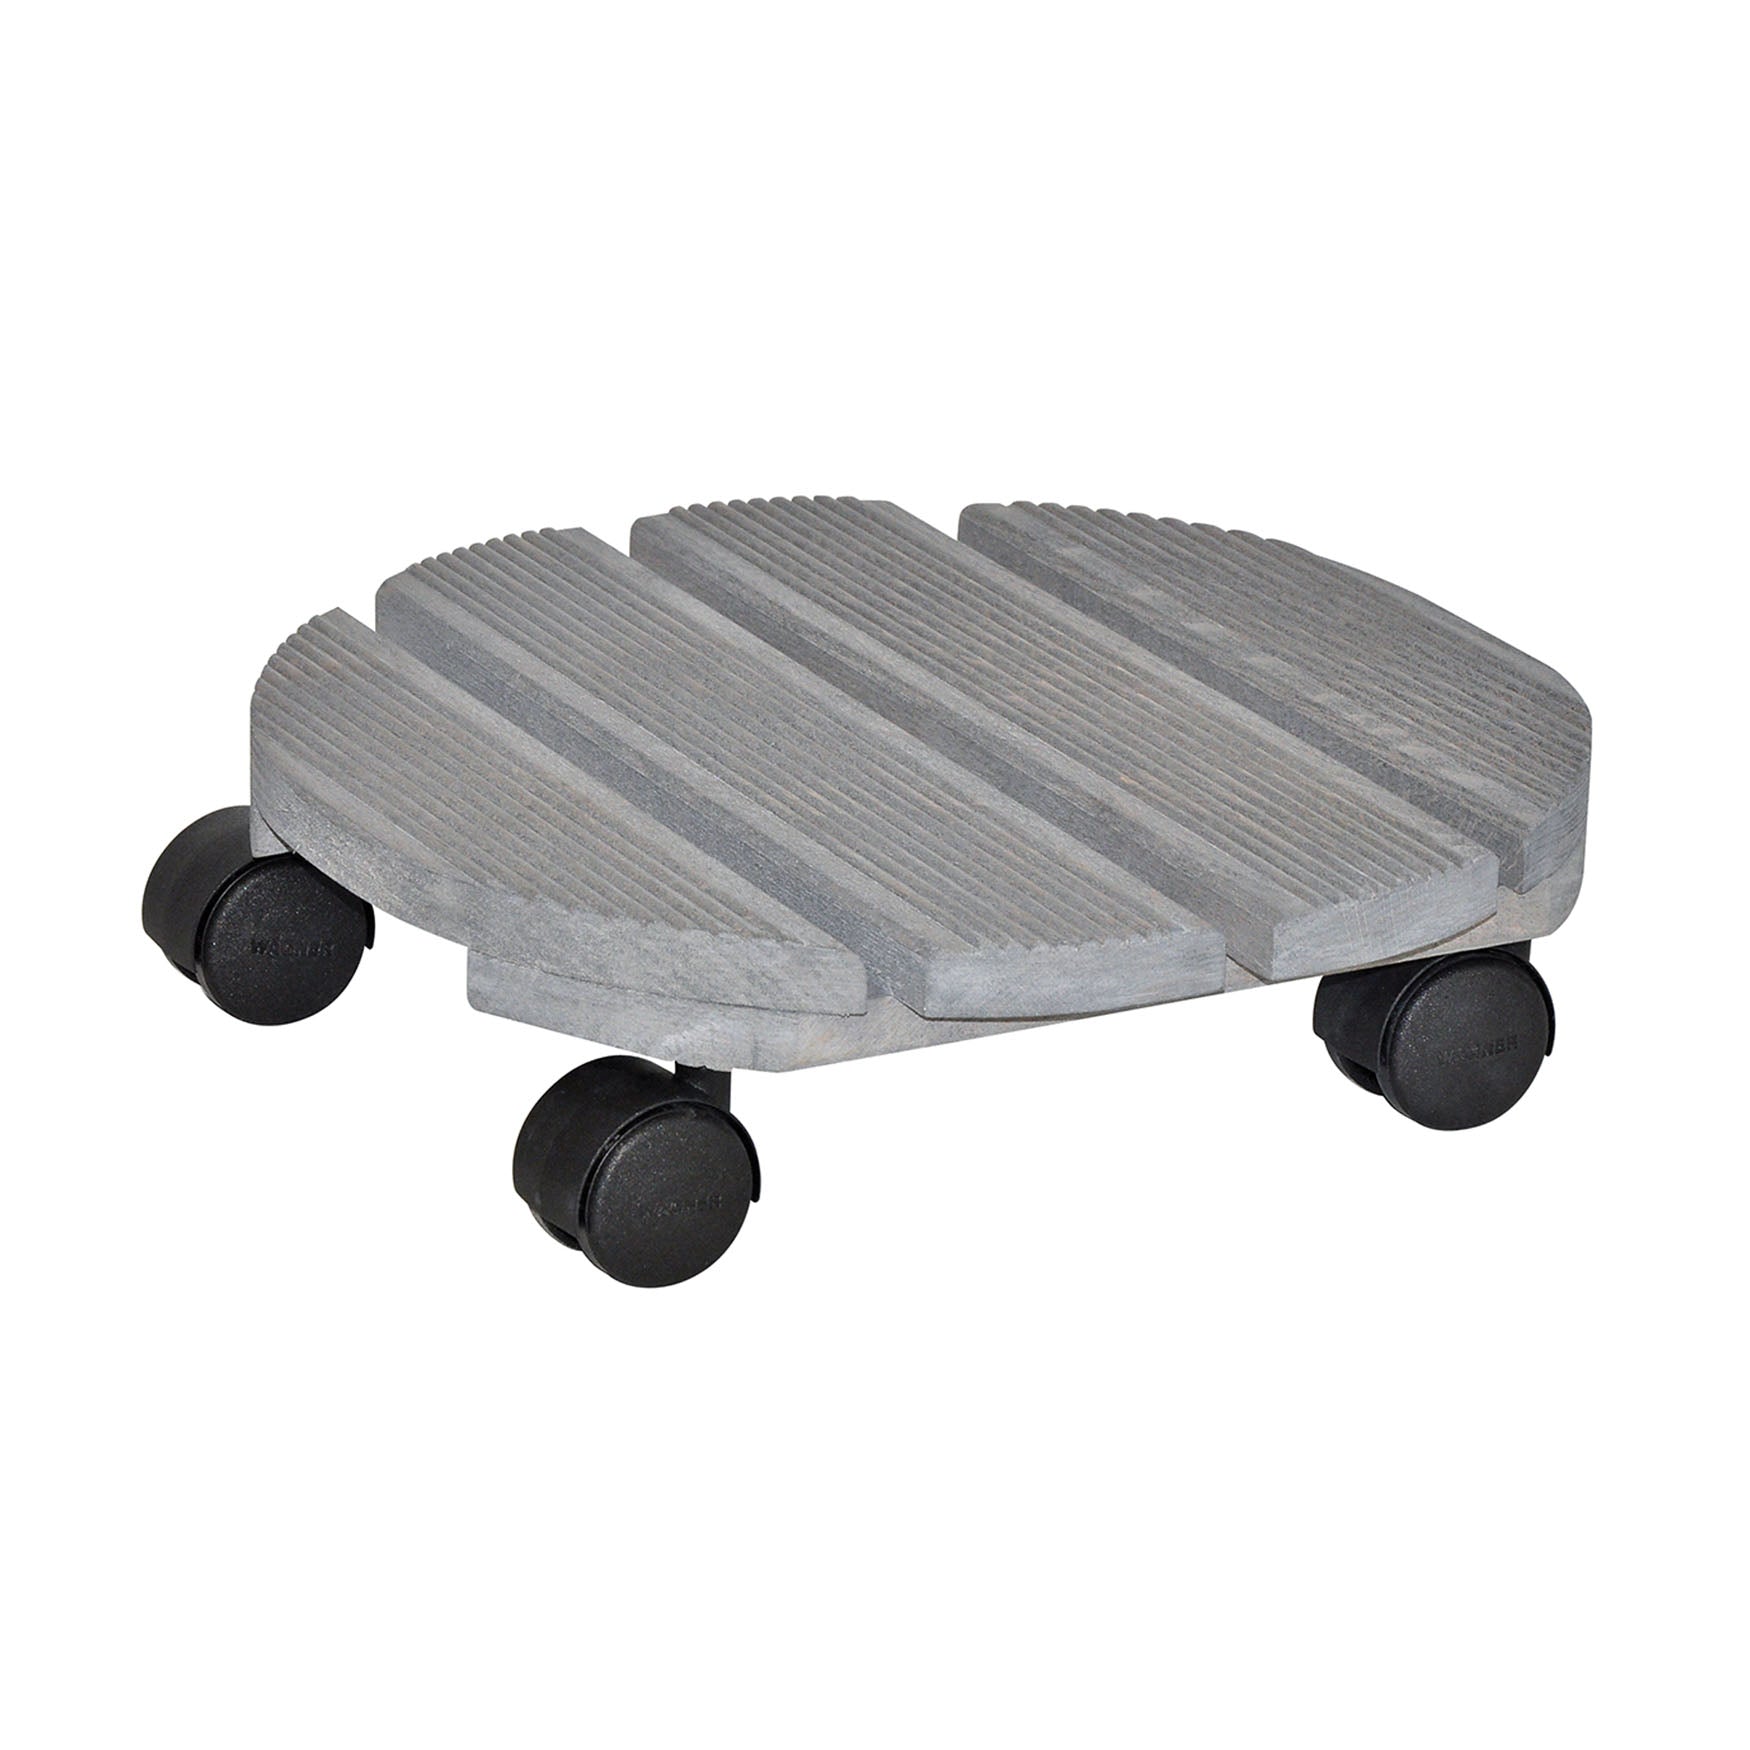 Gray round ribbed plant caddy. Made of beech wood. 220 lbs. capacity. 11.4"D x 3.5"H, 2.3 lbs.